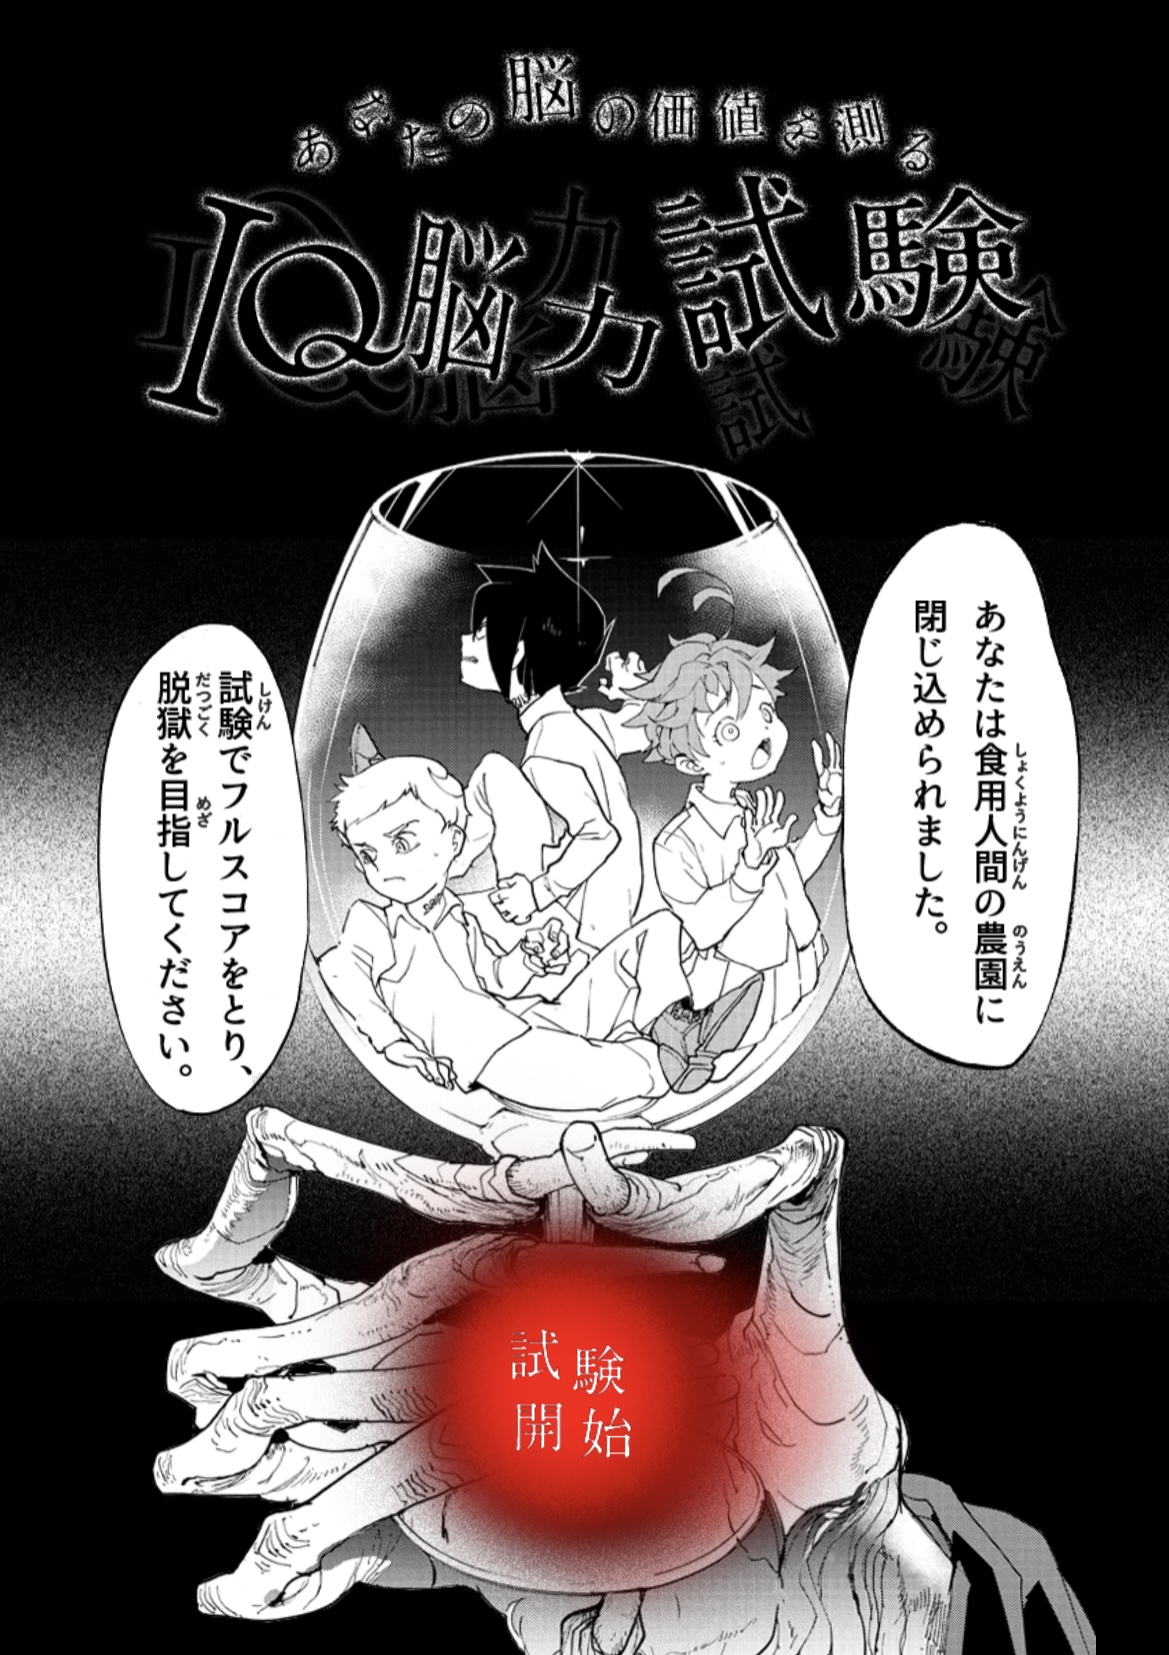 The Promised Neverland Wiki